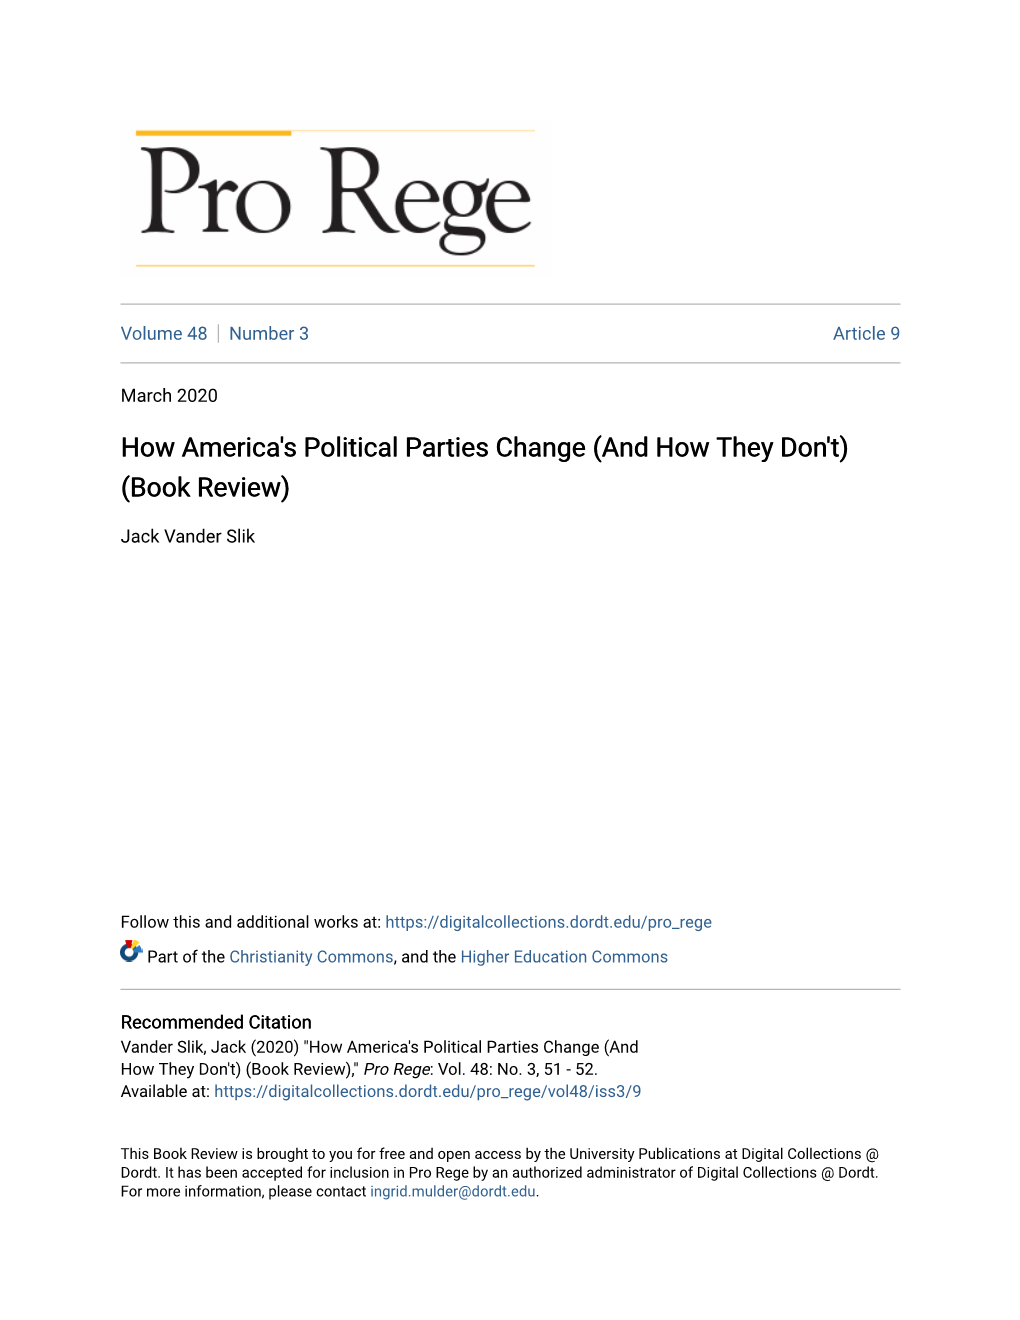 How America's Political Parties Change (And How They Don't) (Book Review)